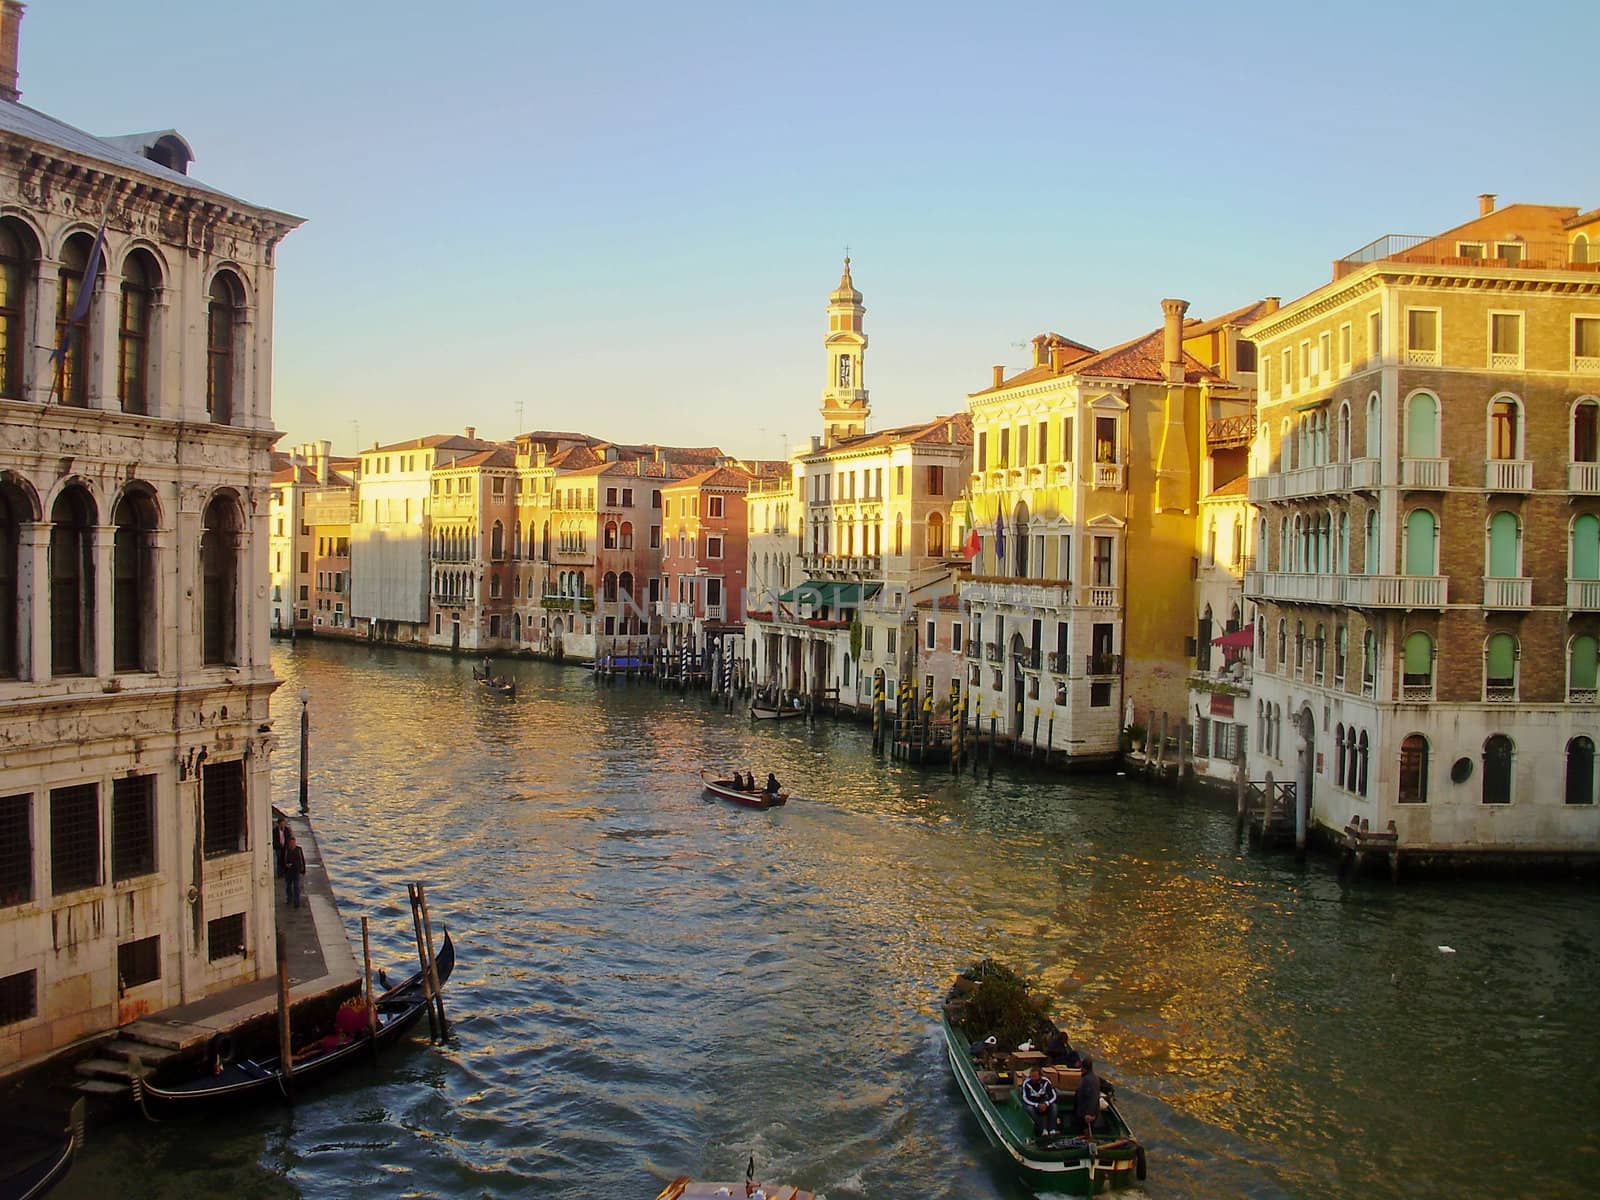 The canals of Venice, Italy. by bigjohn36